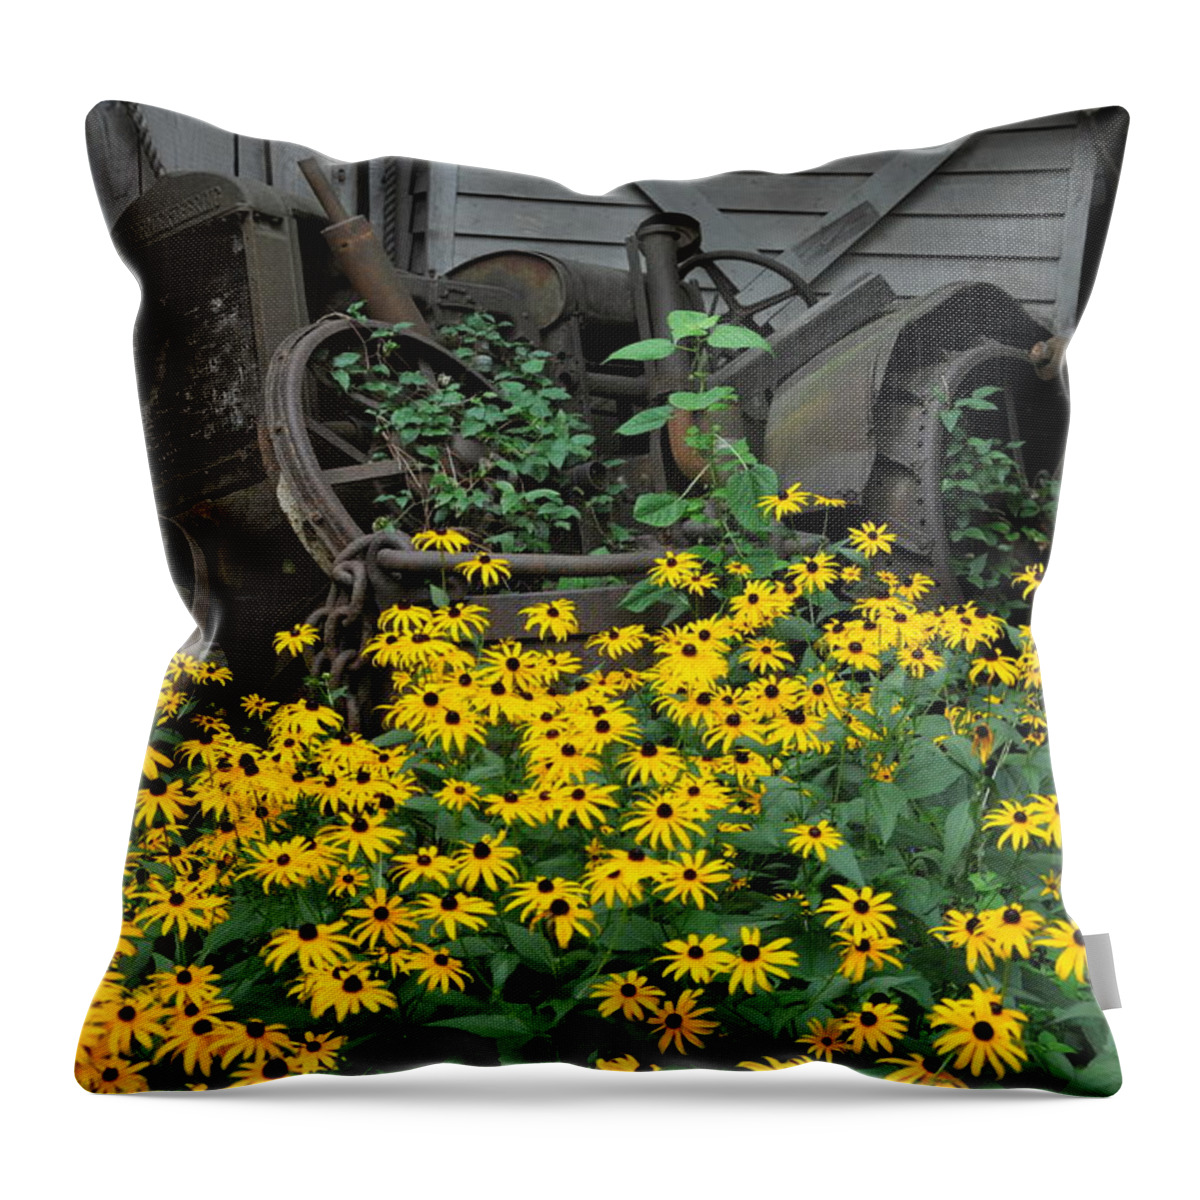 Floral Throw Pillow featuring the photograph The Old And New by Jan Amiss Photography